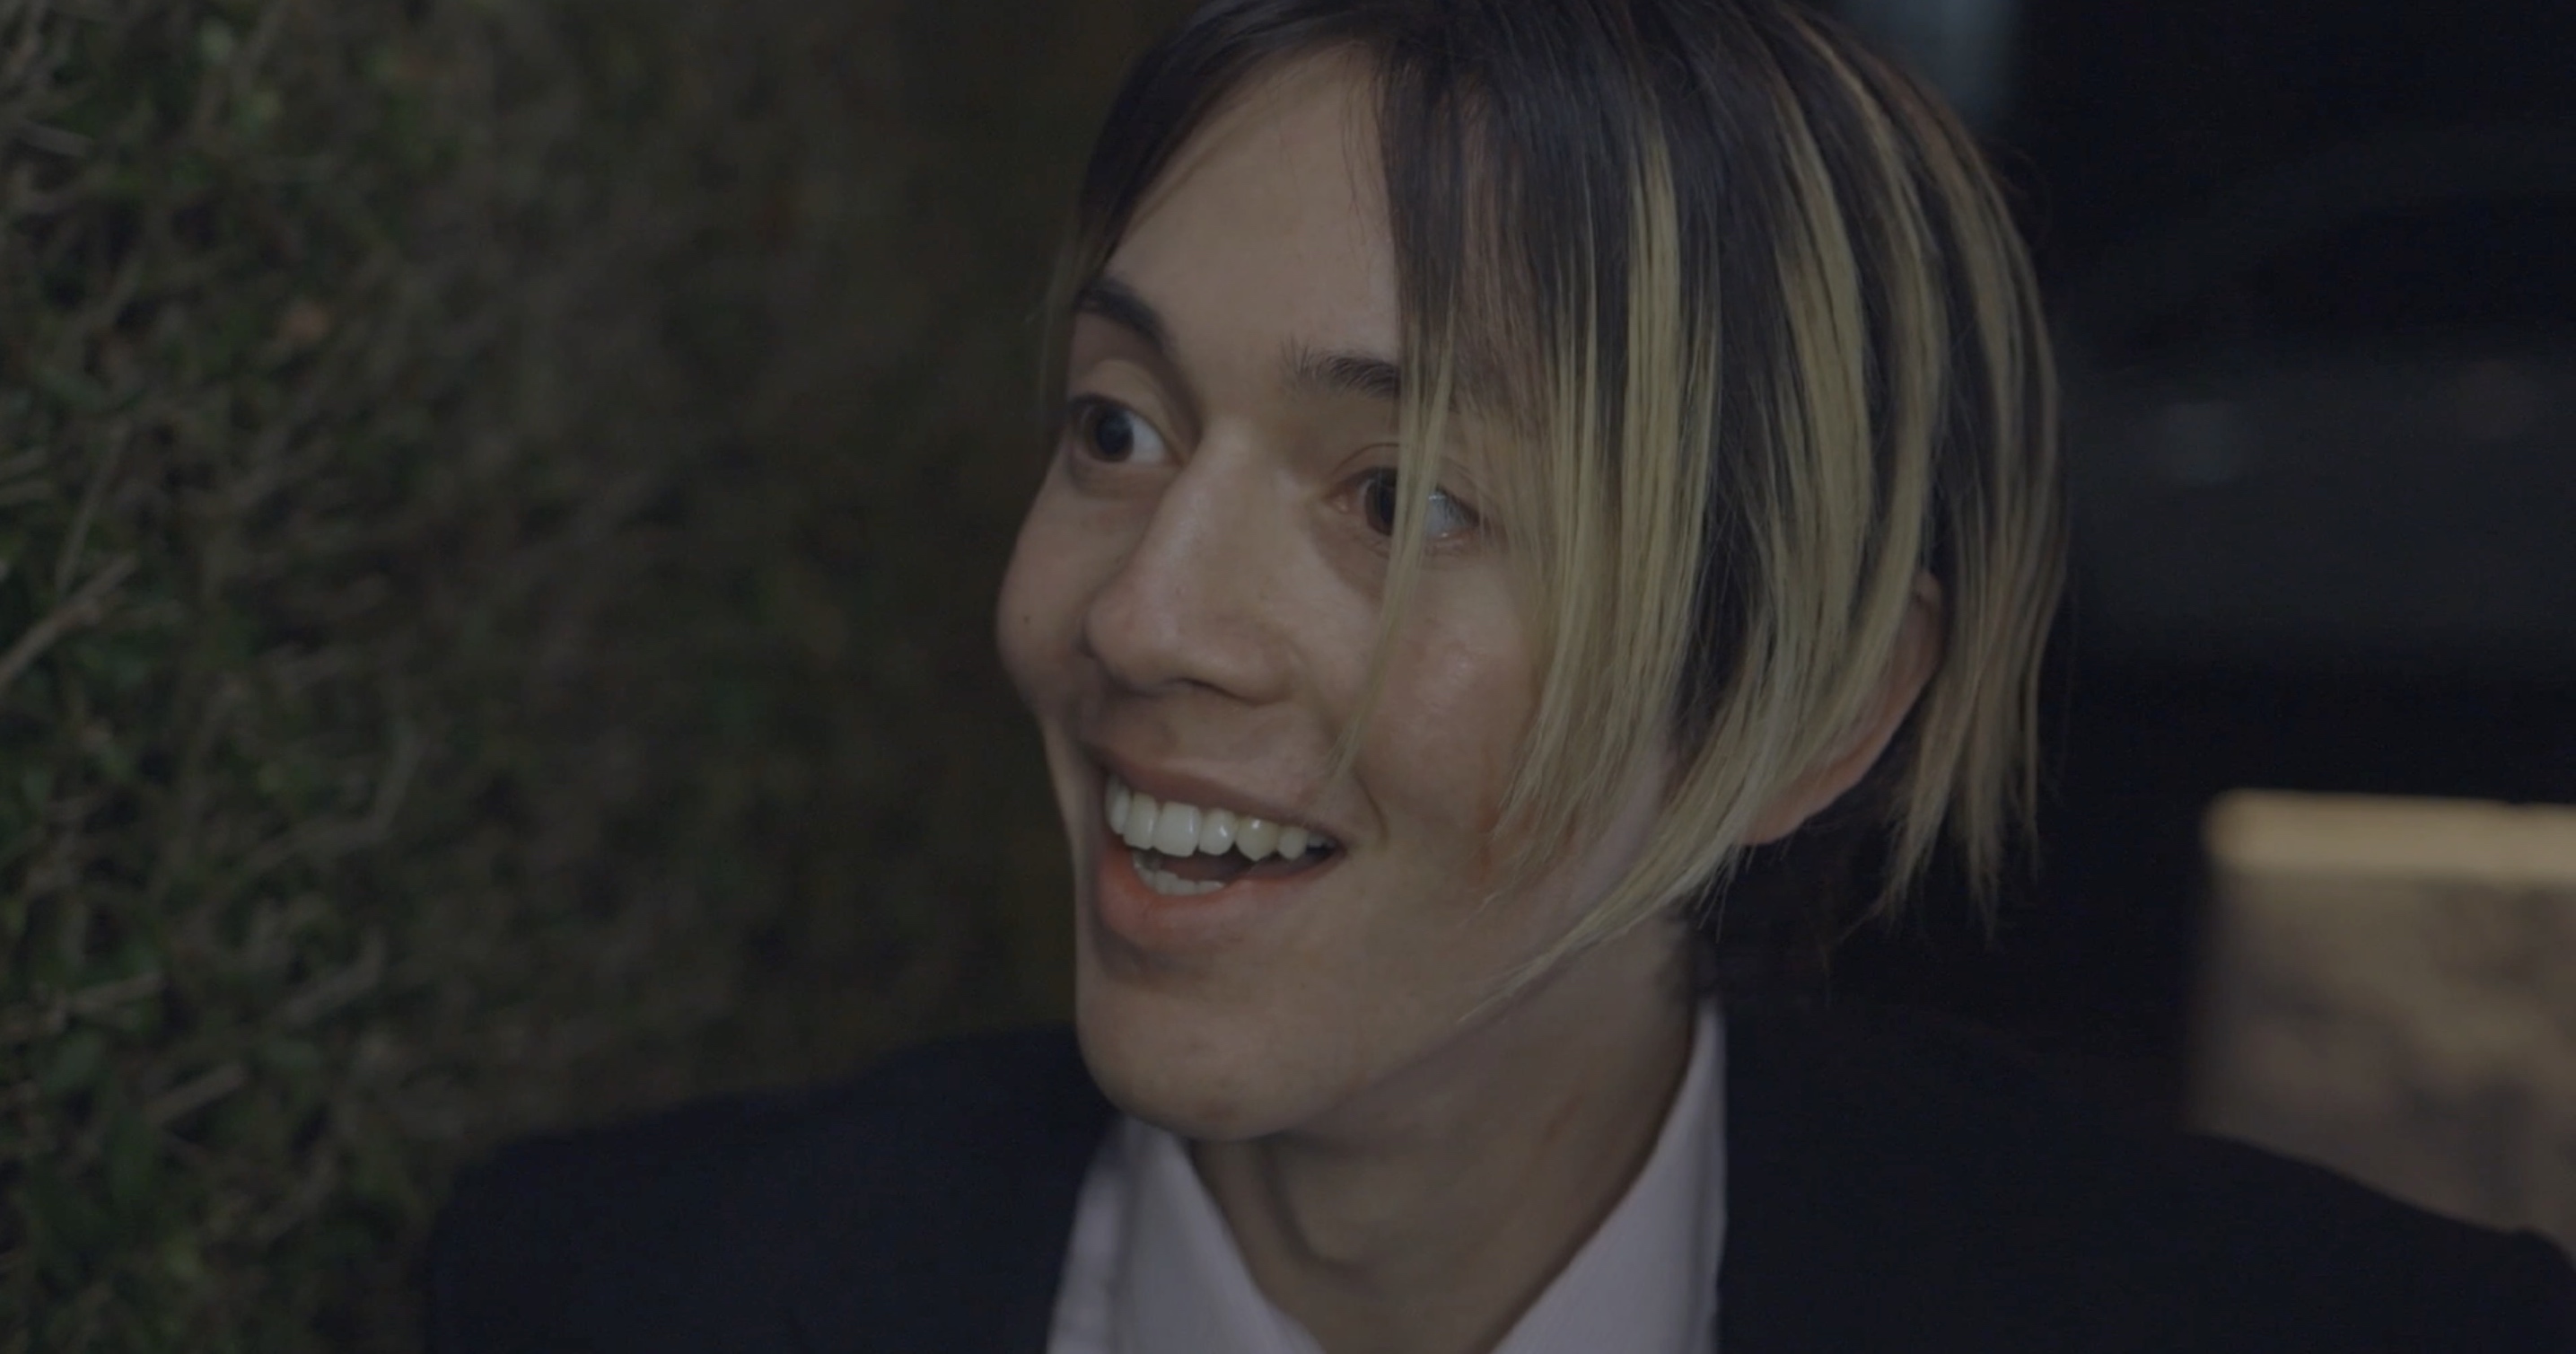 Link image to a Production Showreel featuring 4 individual short films produced by Alex Jones. The image shows a closeup of a smiling character